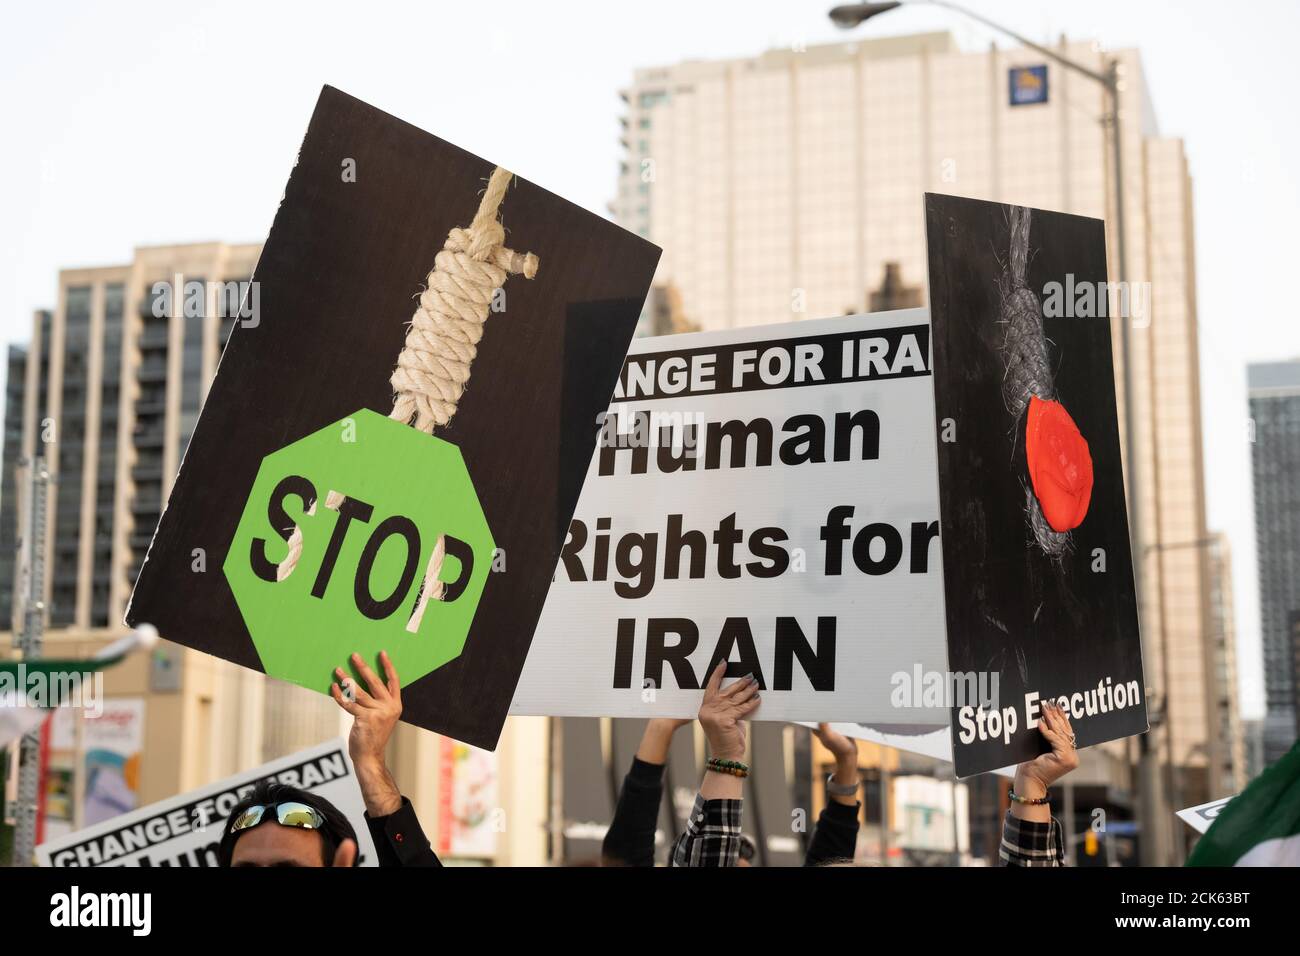 Protesters condemn the Islamic Republic of Iran for executing Navid Afkari and call for human rights at a protest in Toronto, Ontario. Stock Photo